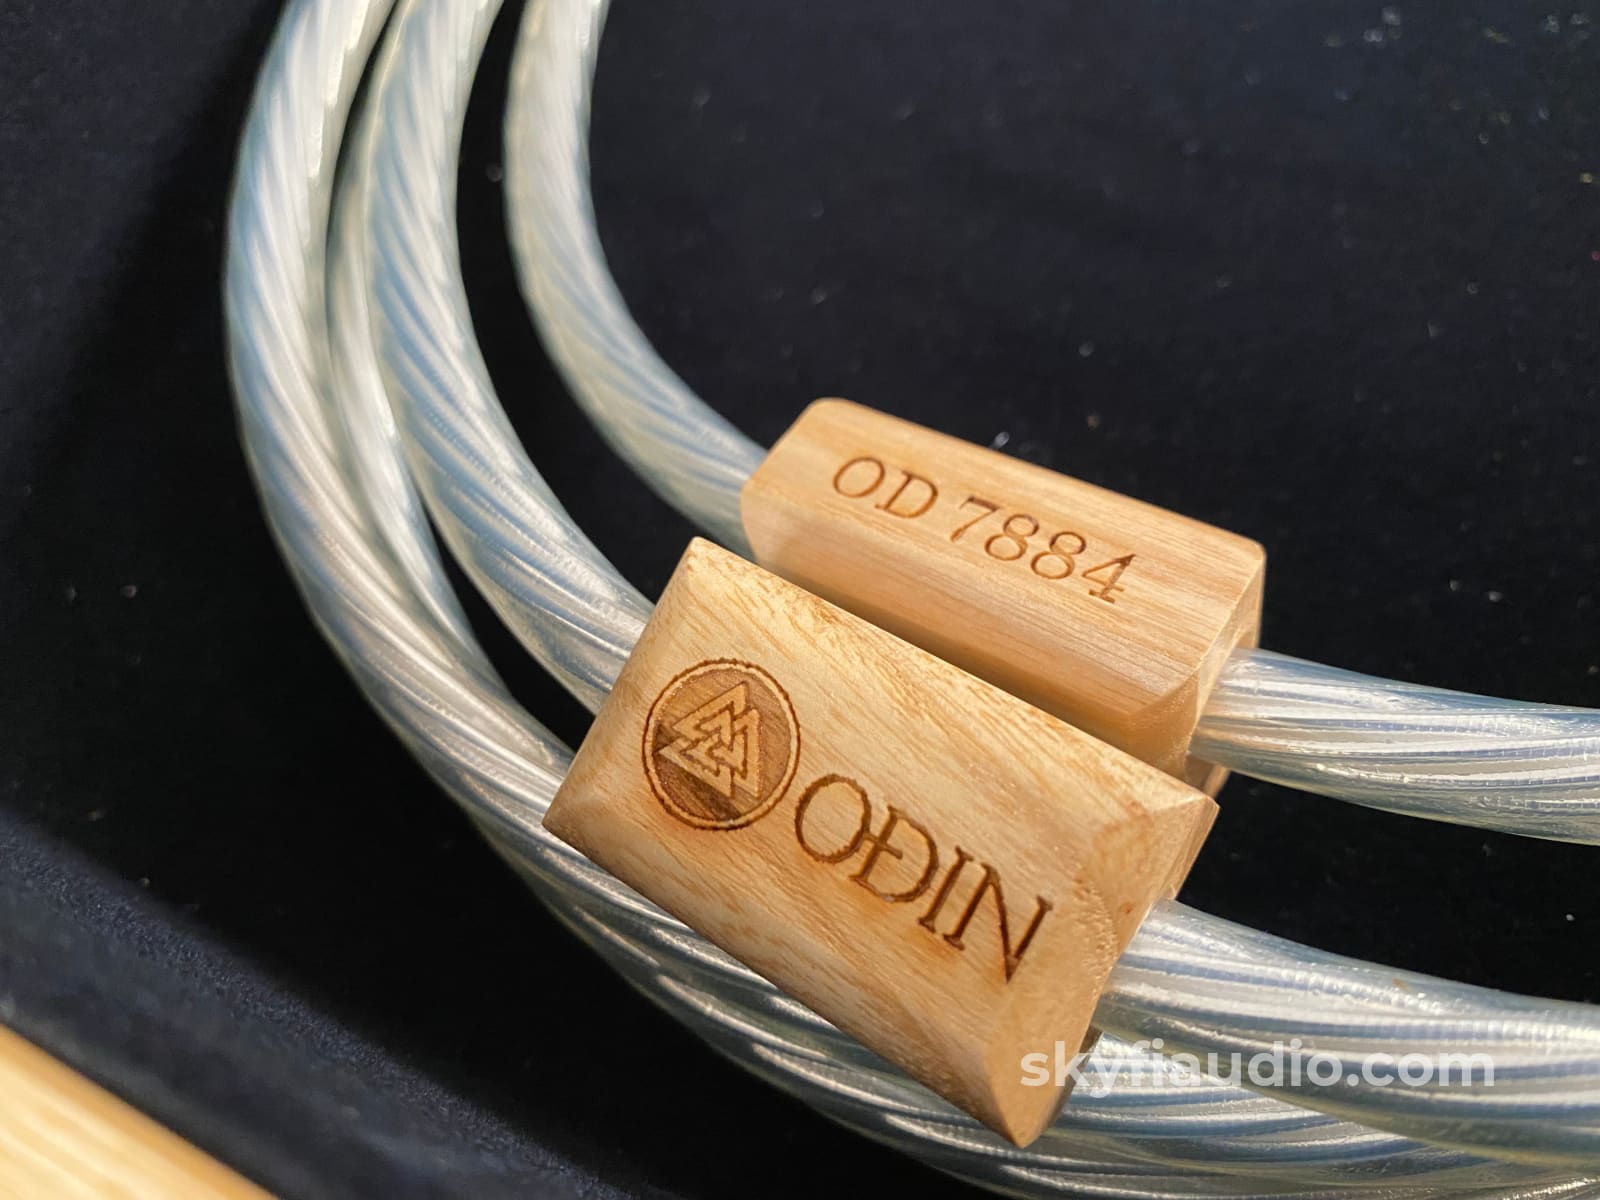 Nordost Odin Supreme Reference Xlr Audio Interconnects - Original Wood Case 1.75M Cables